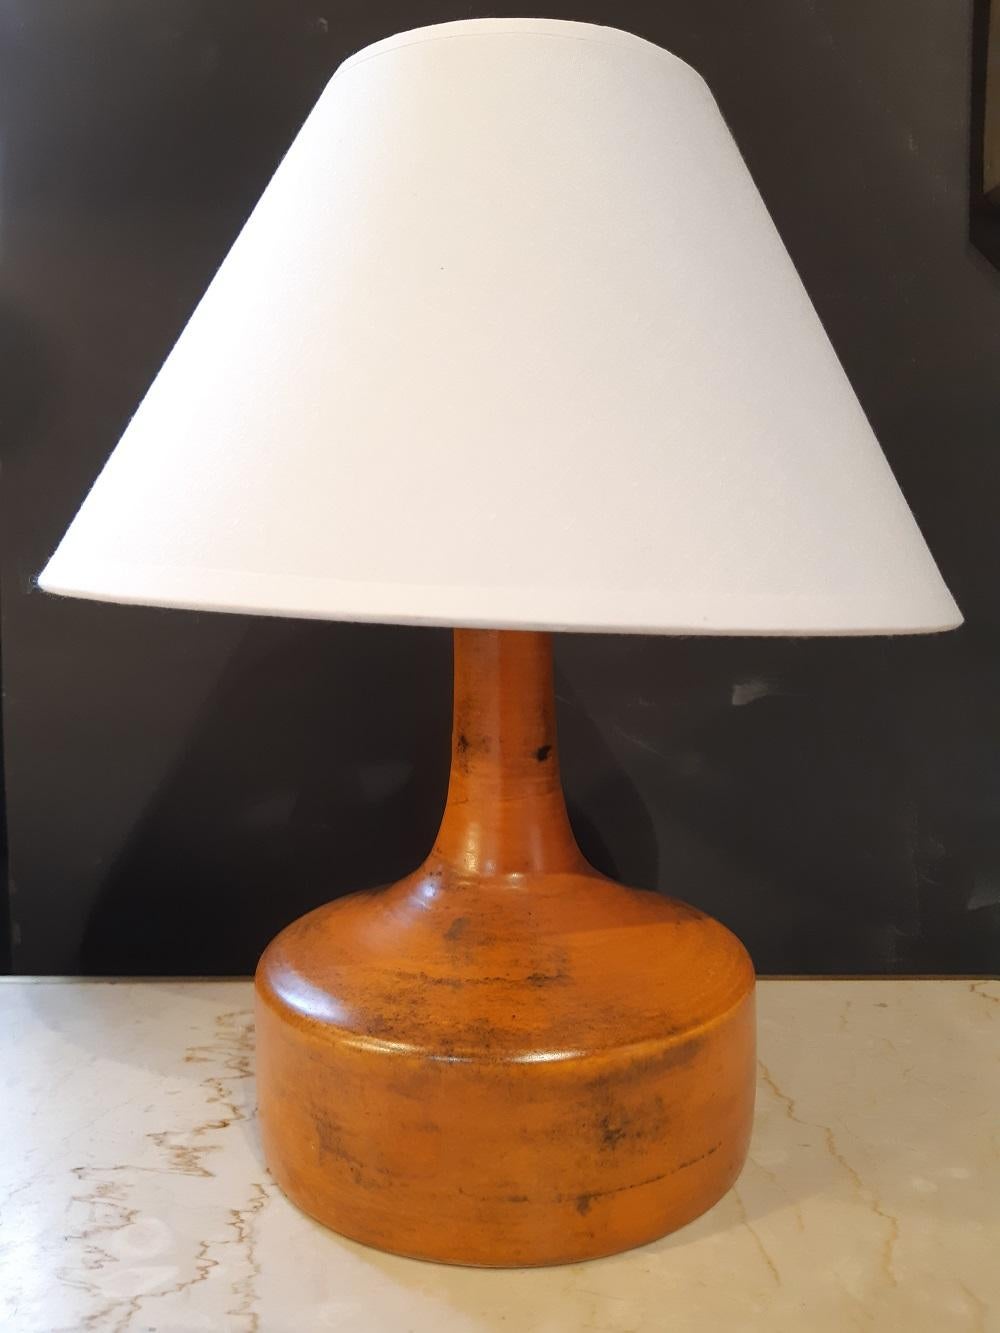 Orange Jacques Blin ceramic lamp France midcentury, 1950
 
Electricity ok and new lampshade provided. 
Signed under the base. 
Measures: Socket height 16.5cm. Height with shade 30cm. Diameter 16cm

Excellent condition.
  